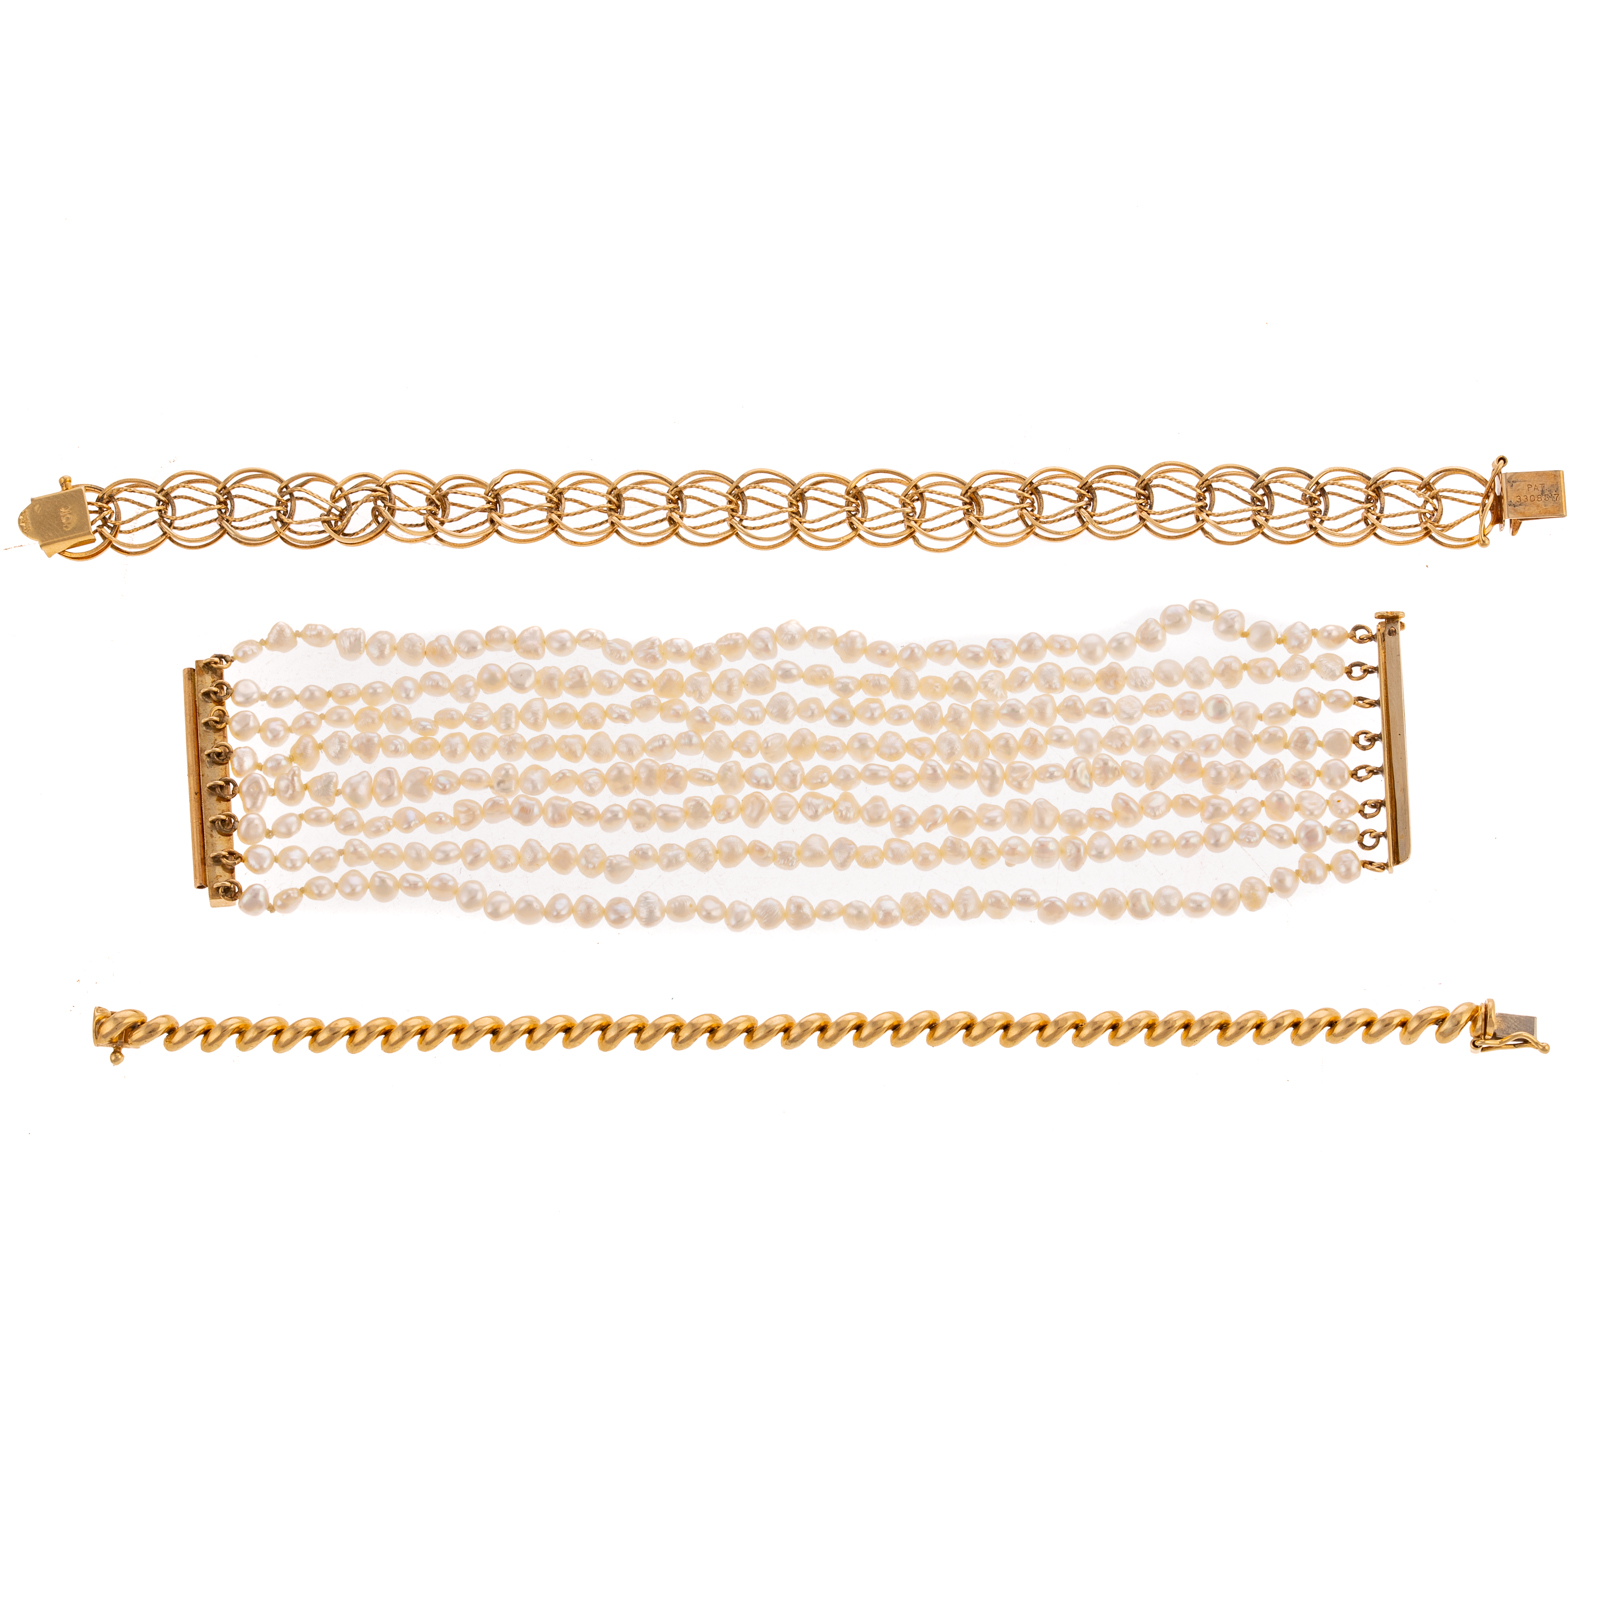 A TRIO OF YELLOW GOLD PEARL BRACELETS 3386b3